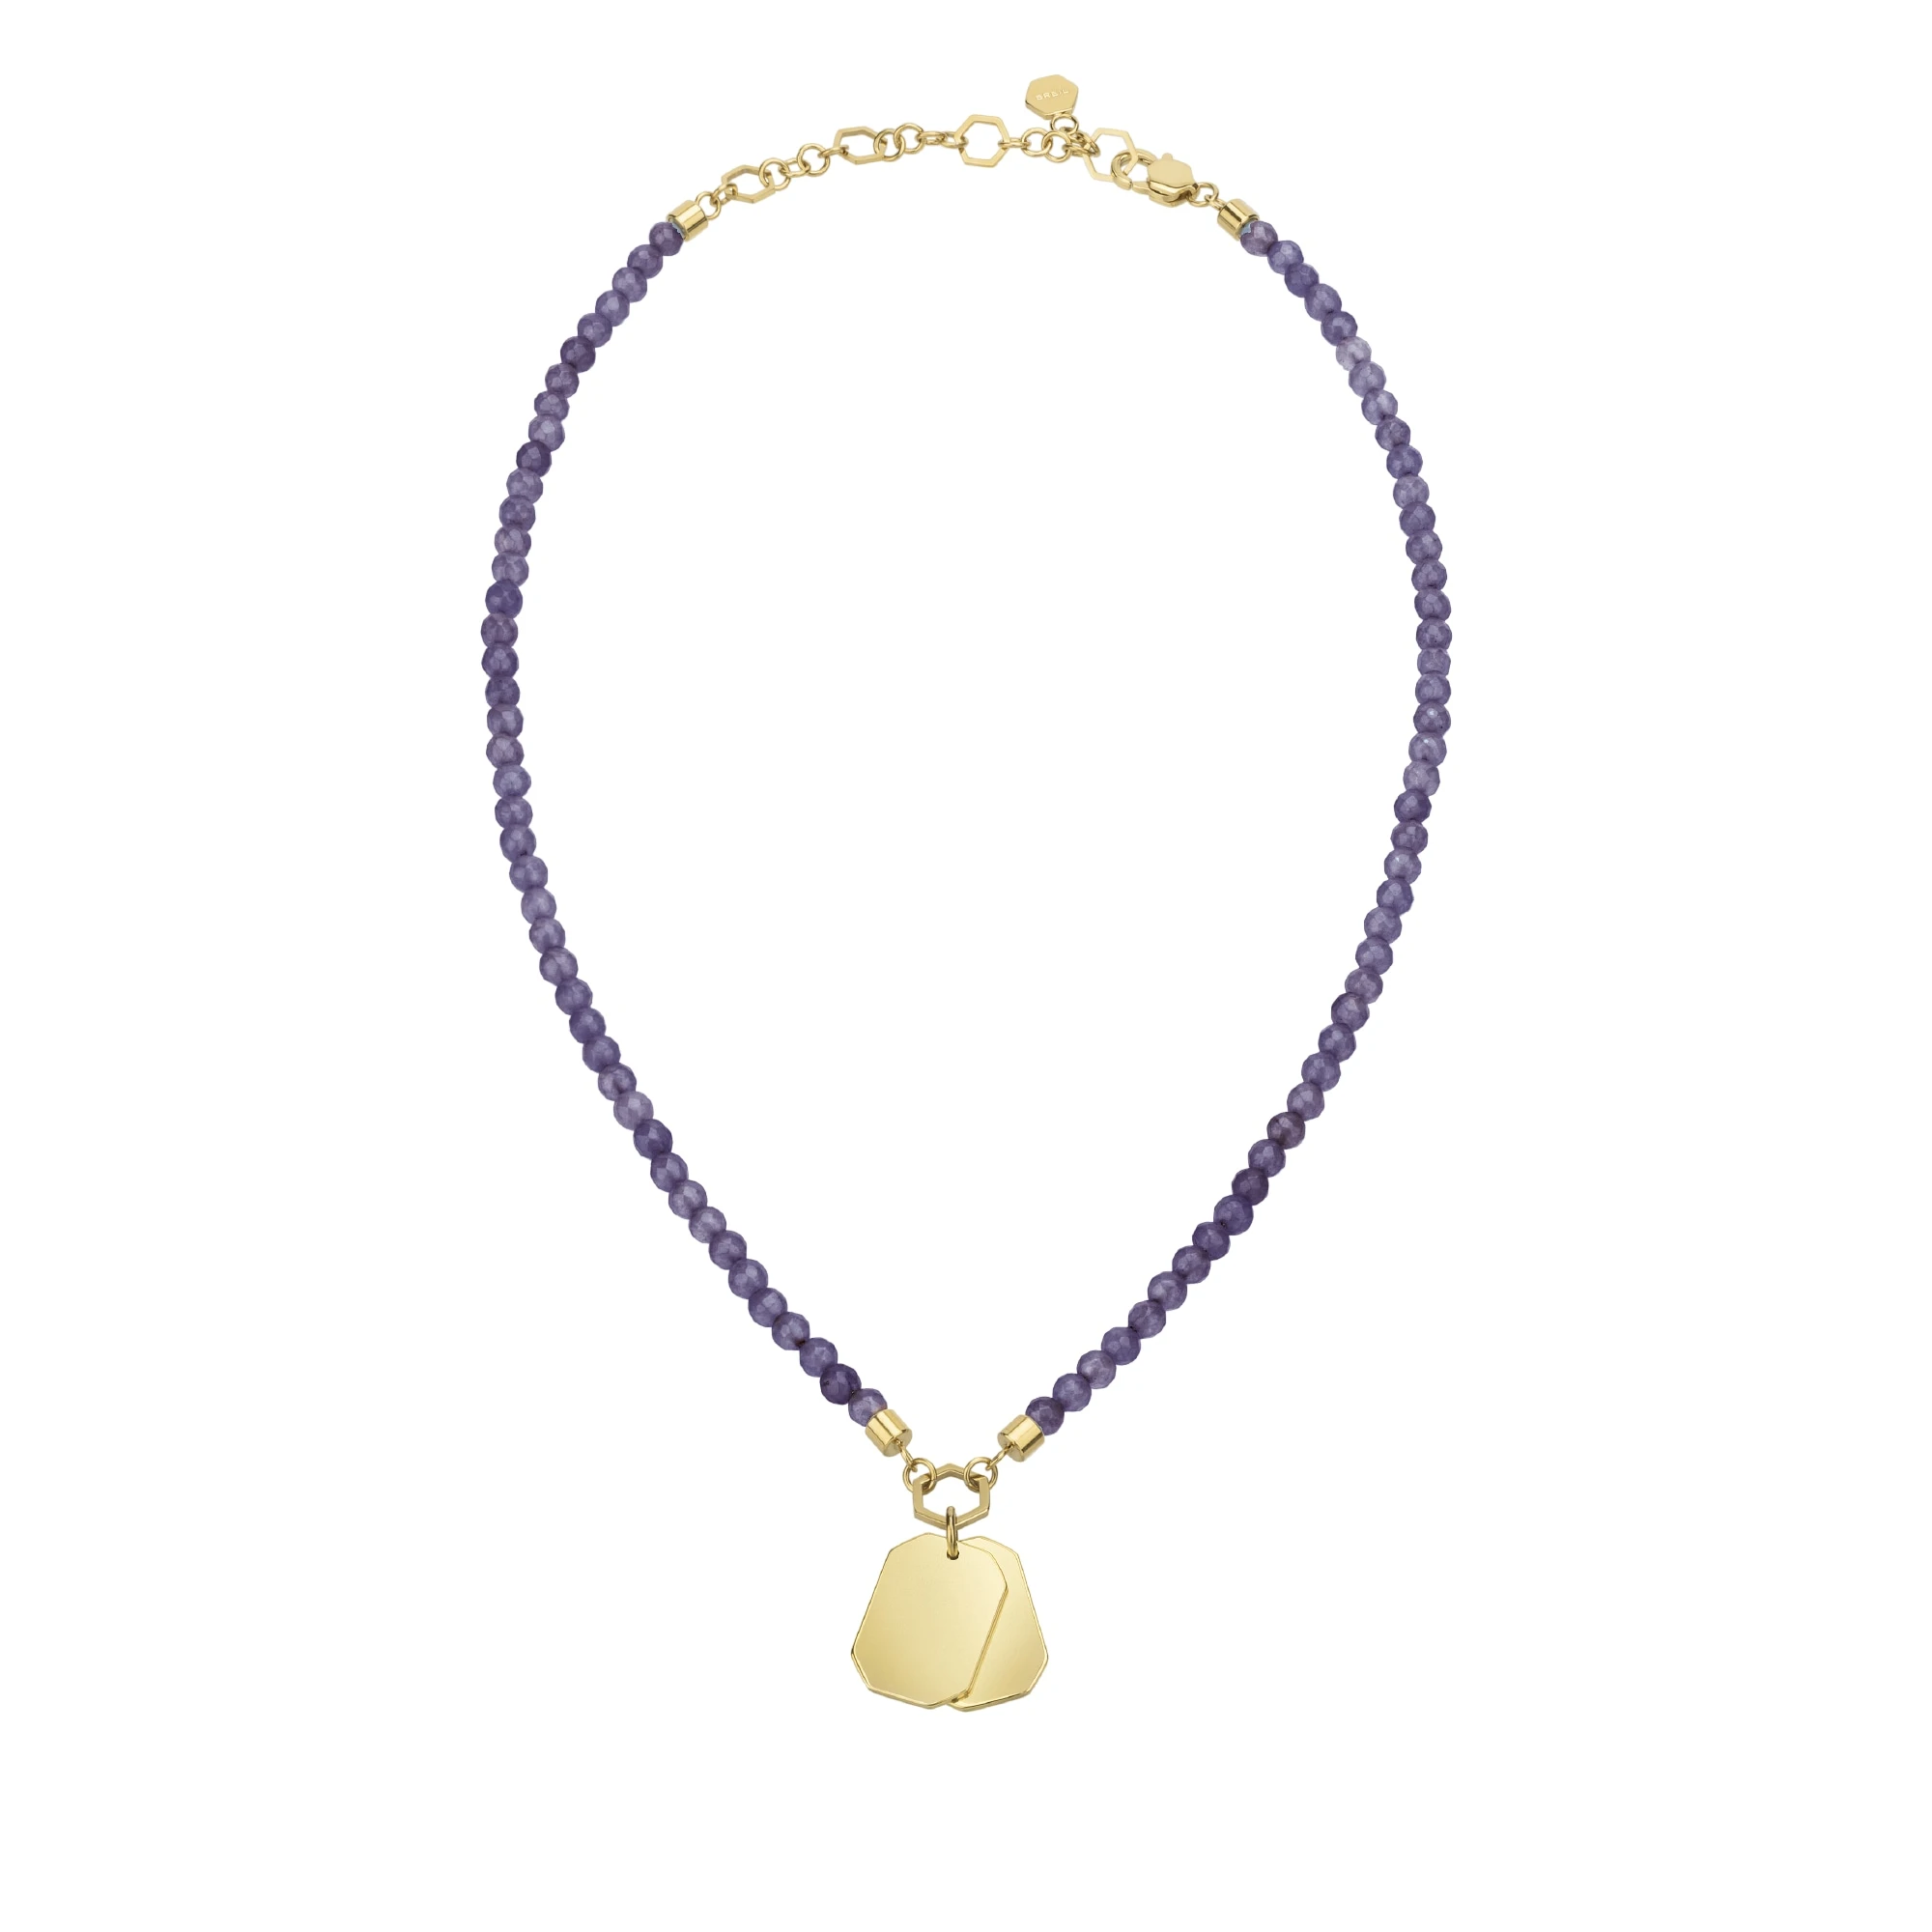 PRIVATE CODE - AMETHYST NECKLACE WITH IP GOLD STEEL PENDANT - 1 - TJ3151 | Breil